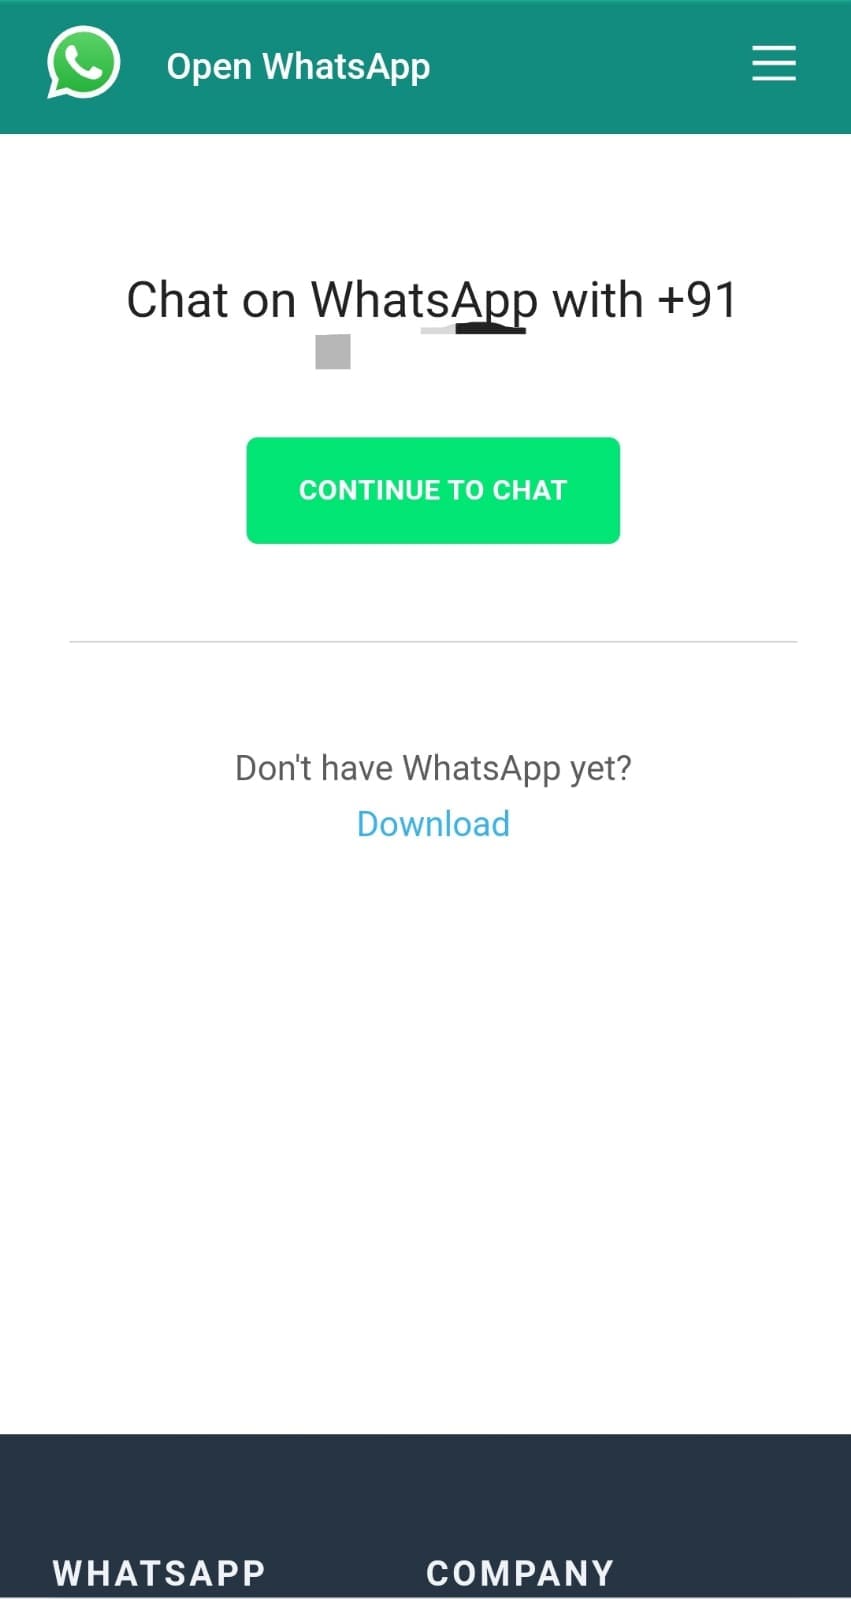 how to send message on whatsapp without saving the number, how to send whatsapp message without saving the number, send message on whatsapp without saving the number, whatsapp tips and tricks, how to send message on whatsapp without saving the contact number